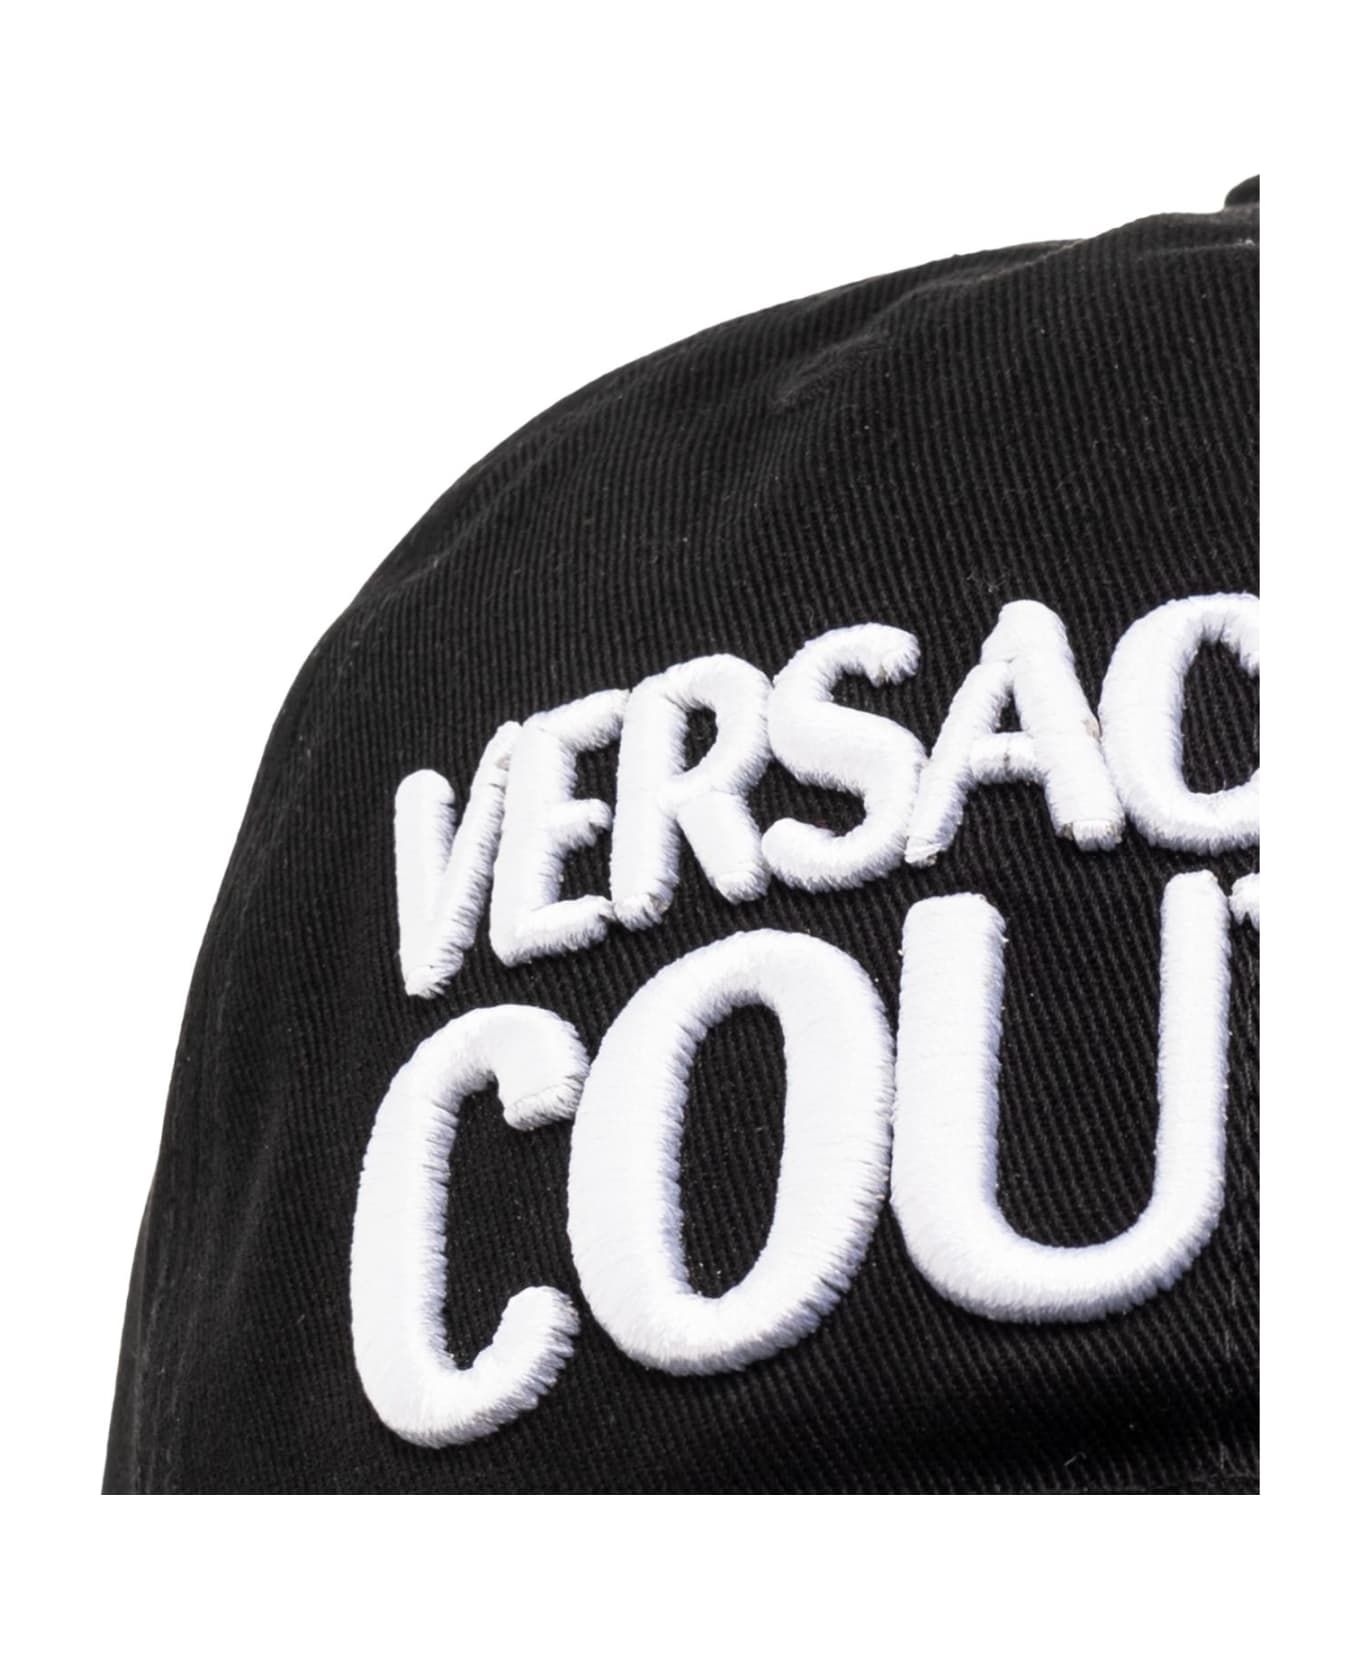 Versace Jeans Couture Baseball Cap With Logo - NERO